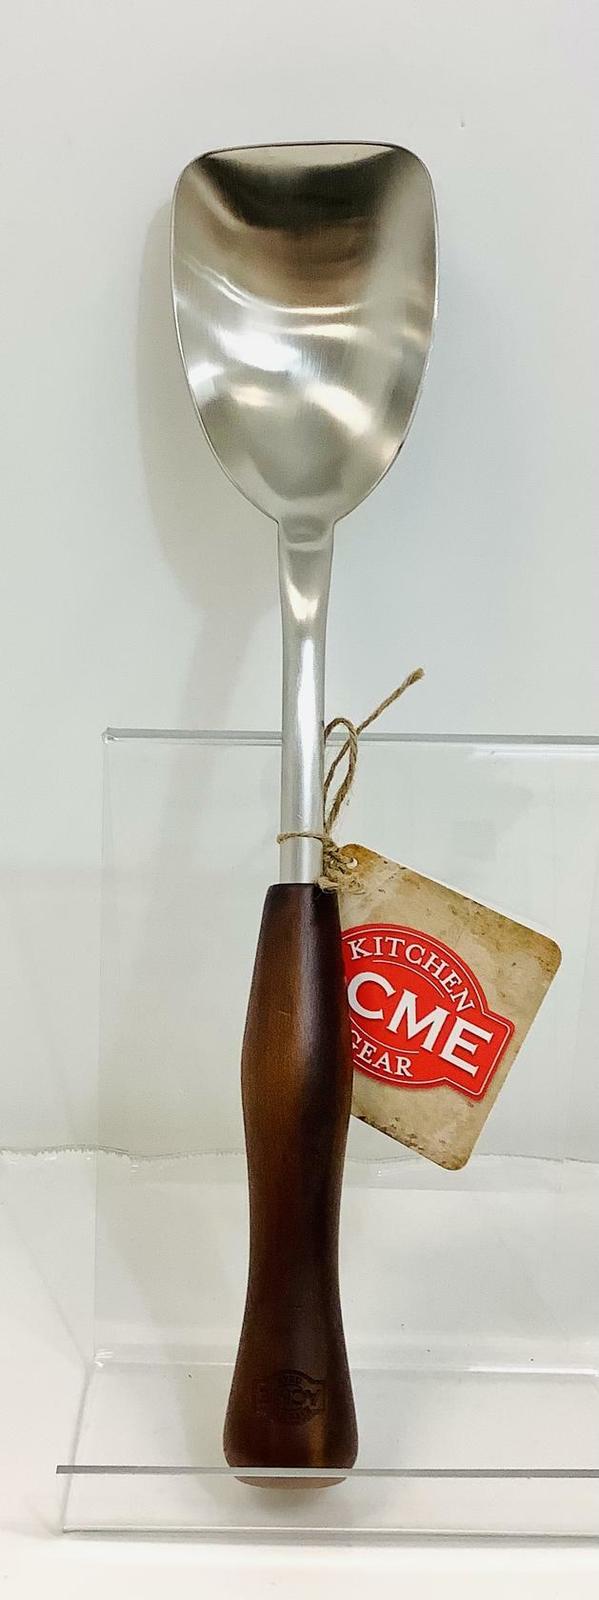 ACME Vintage Gear Solid Spoon, Stainless Steel with Acacia Hardwood Handle - $16.16